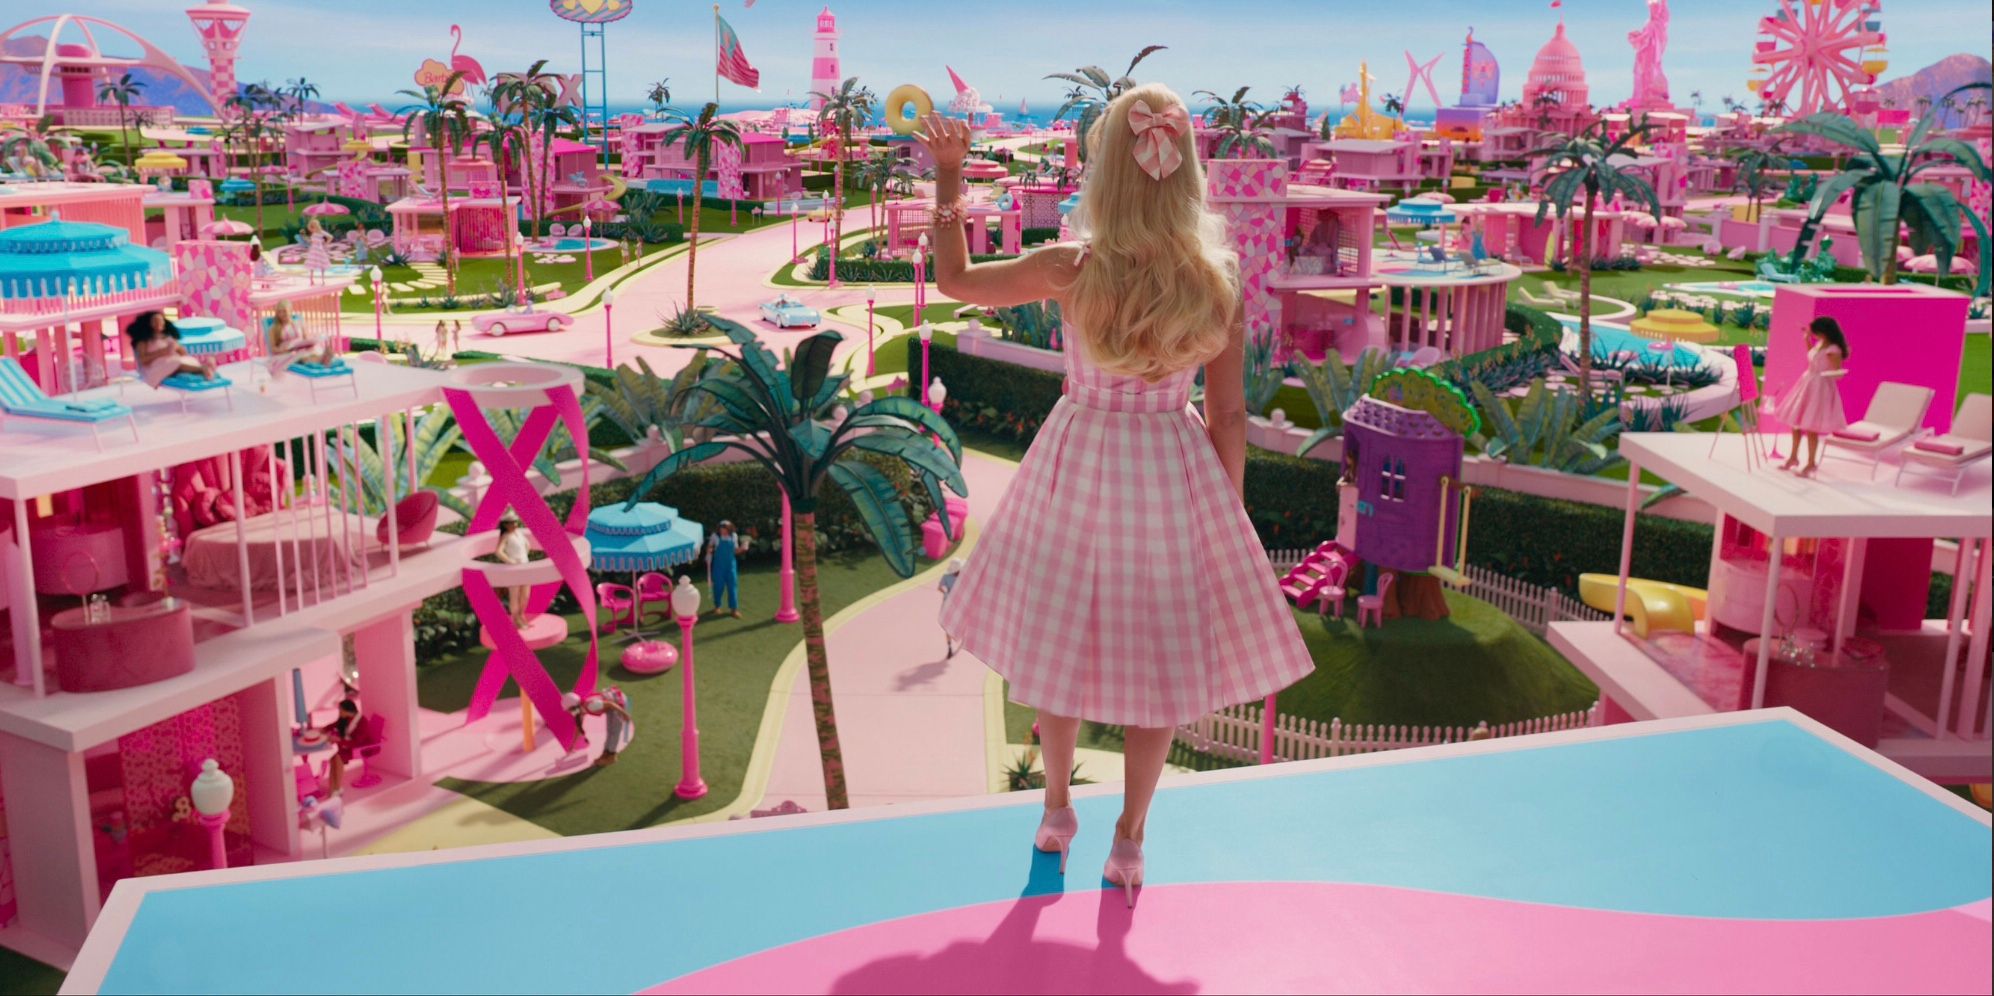 Barbie waves to all the other toy people in Barbieland